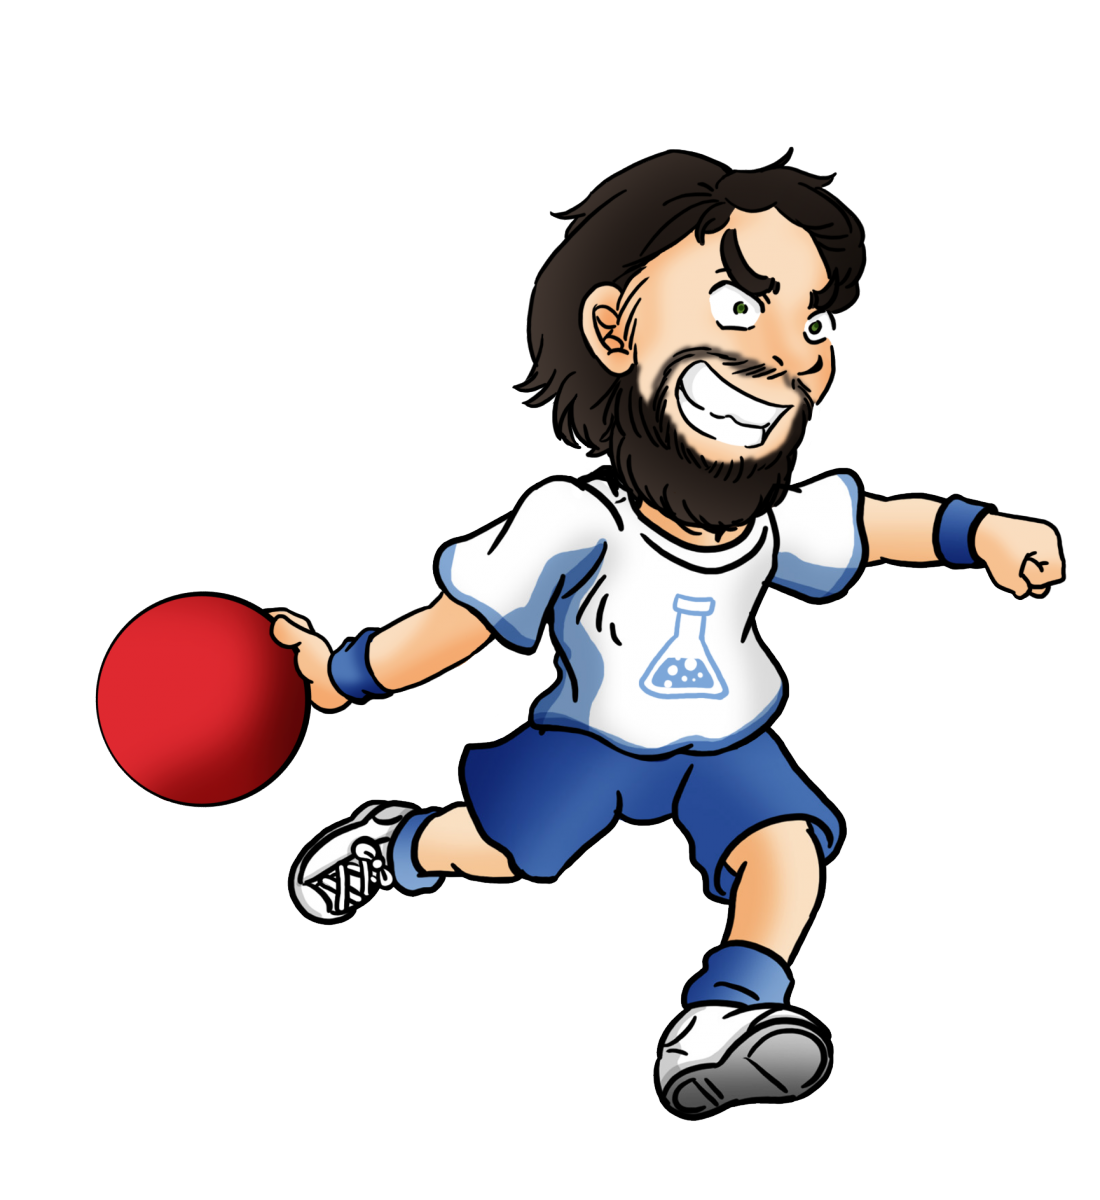 Dodgeball PNG Pic